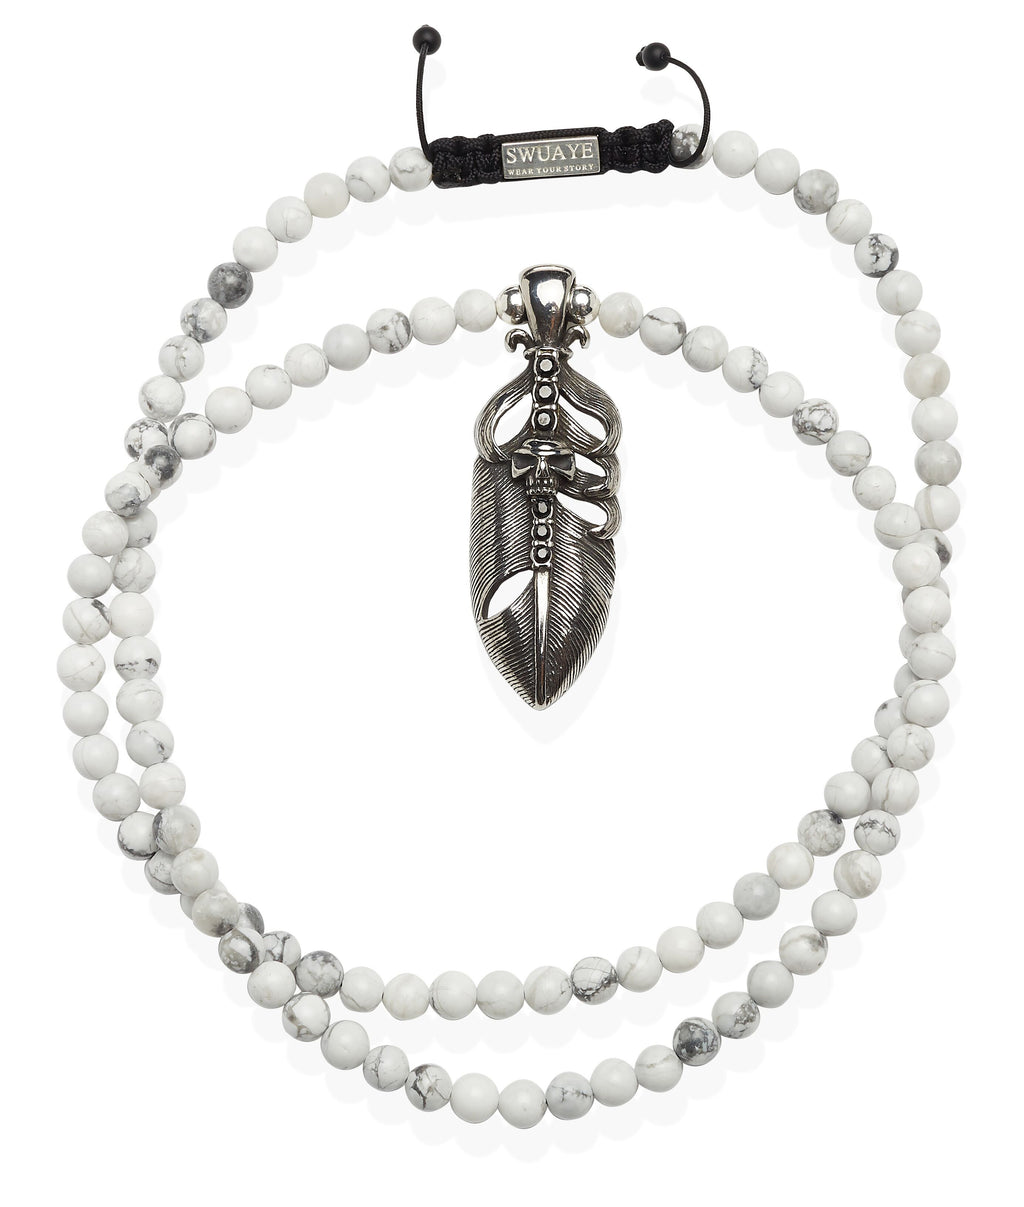 Howlite Necklace with Skull Pendant